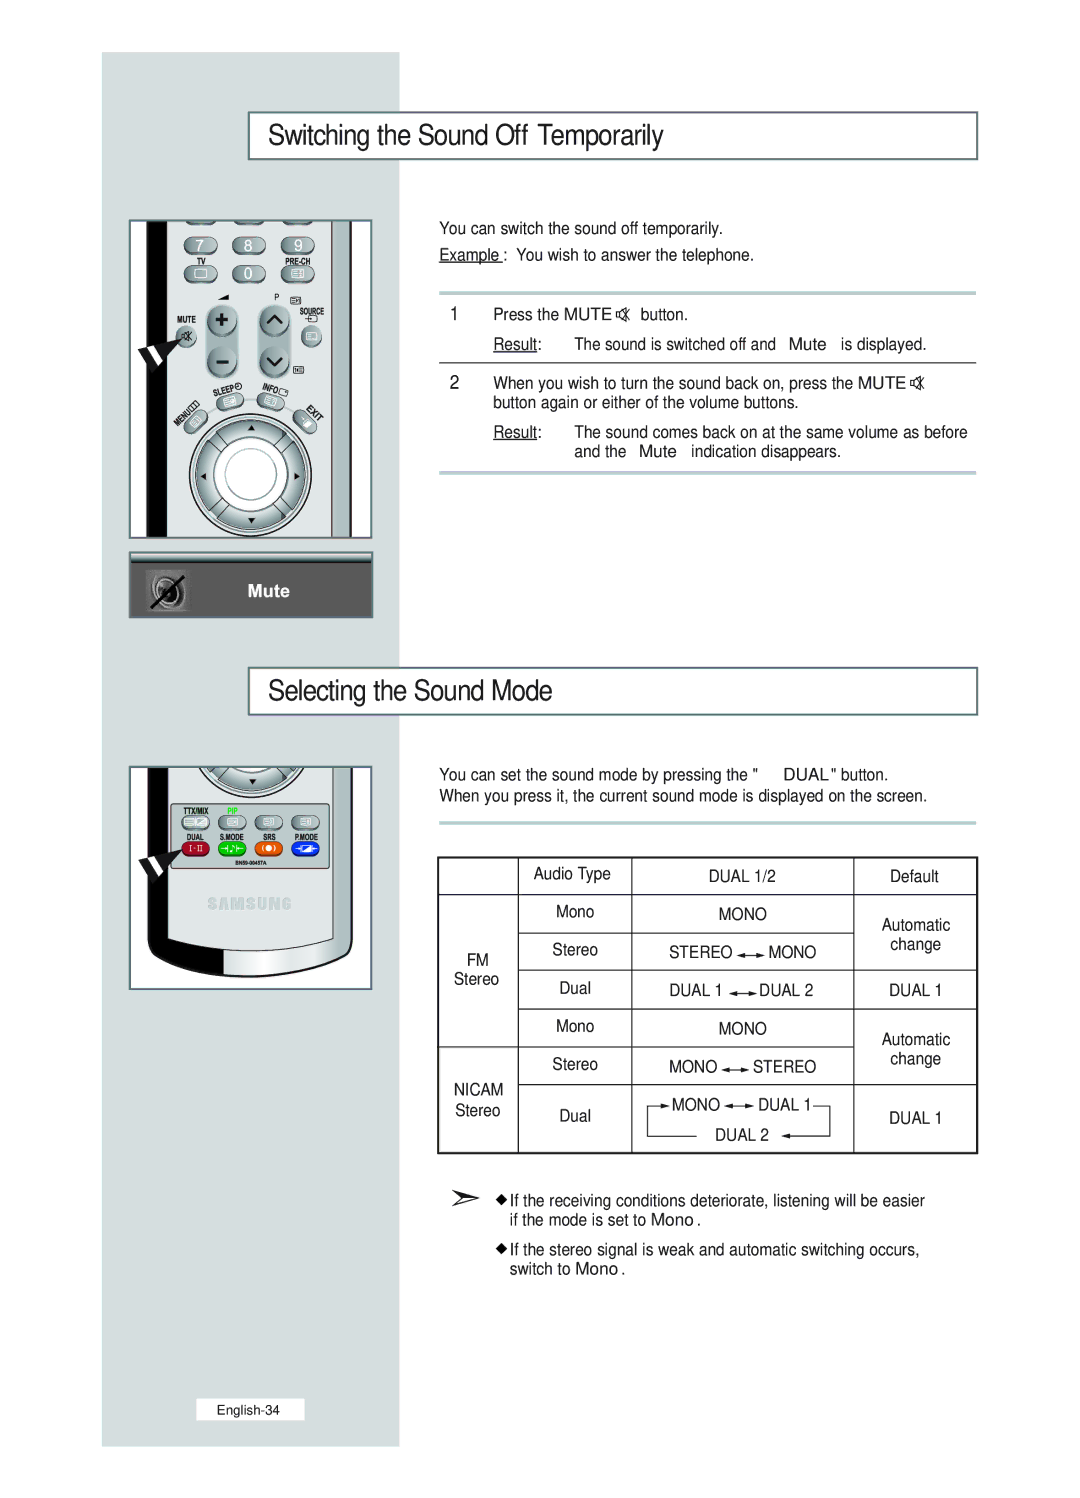 Samsung LE23R51B manual Switching the Sound Off Temporarily, Selecting the Sound Mode 